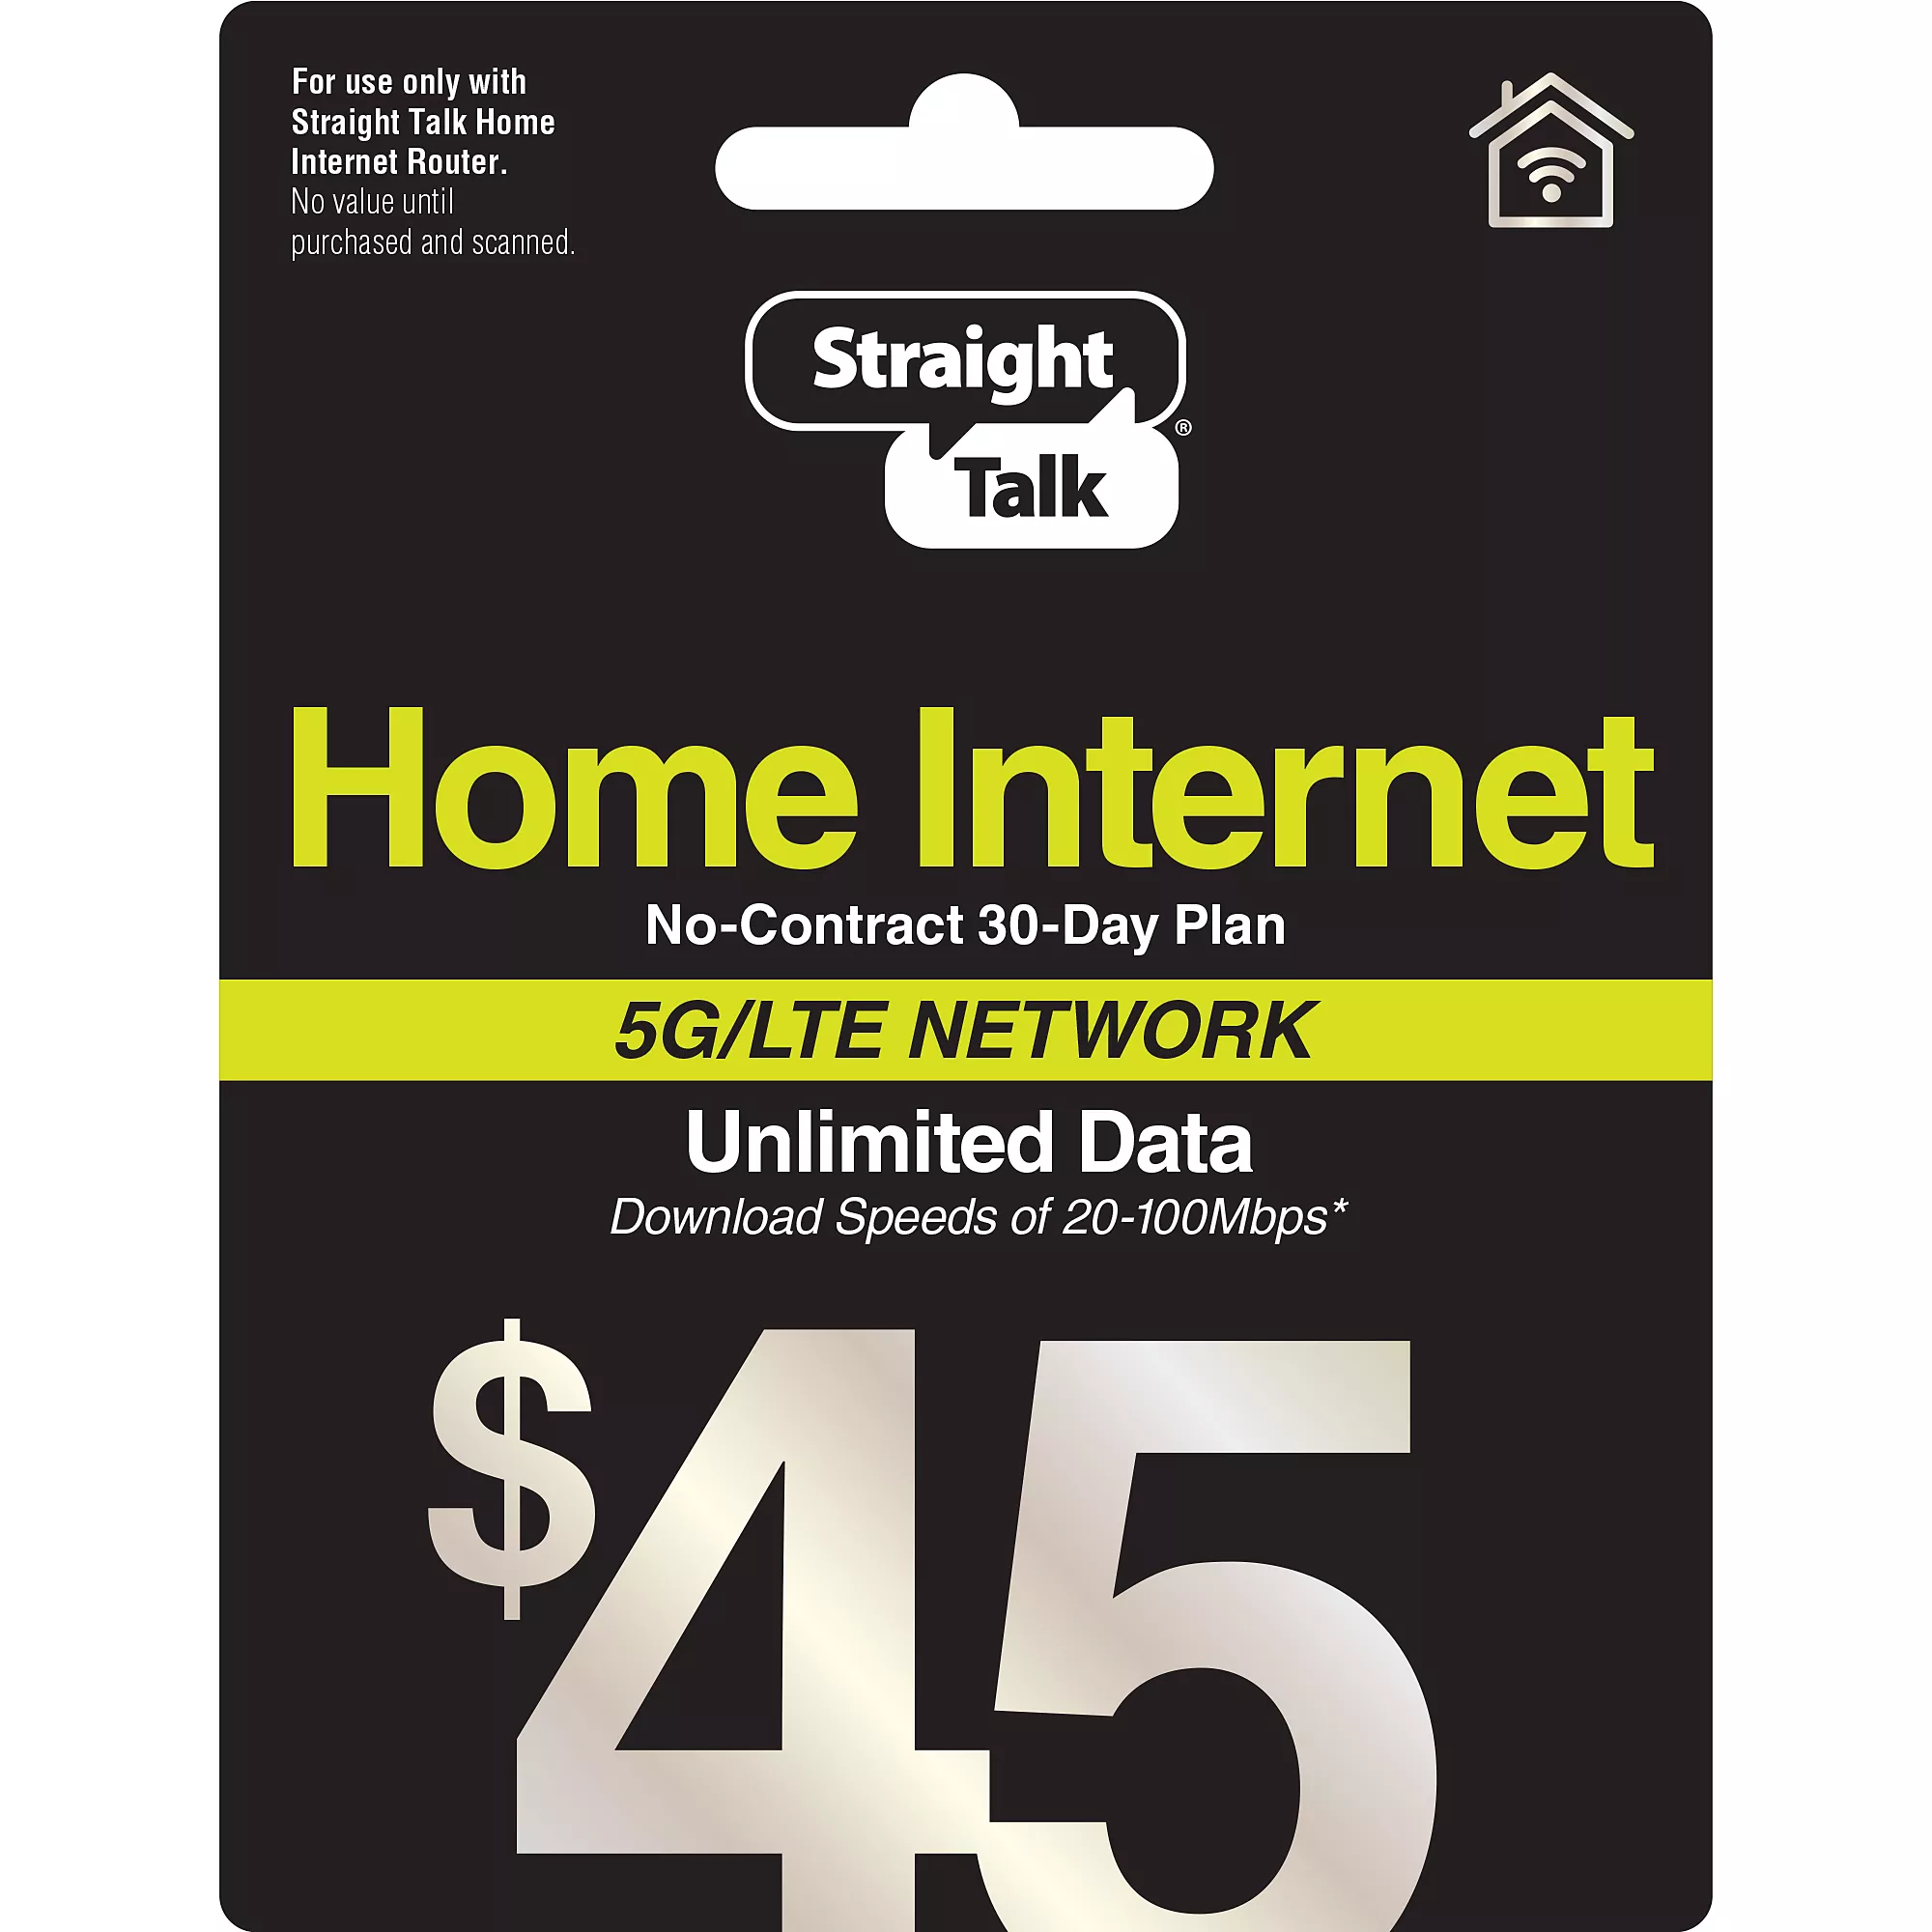 Reliable 5G home internet that's simple to set up.